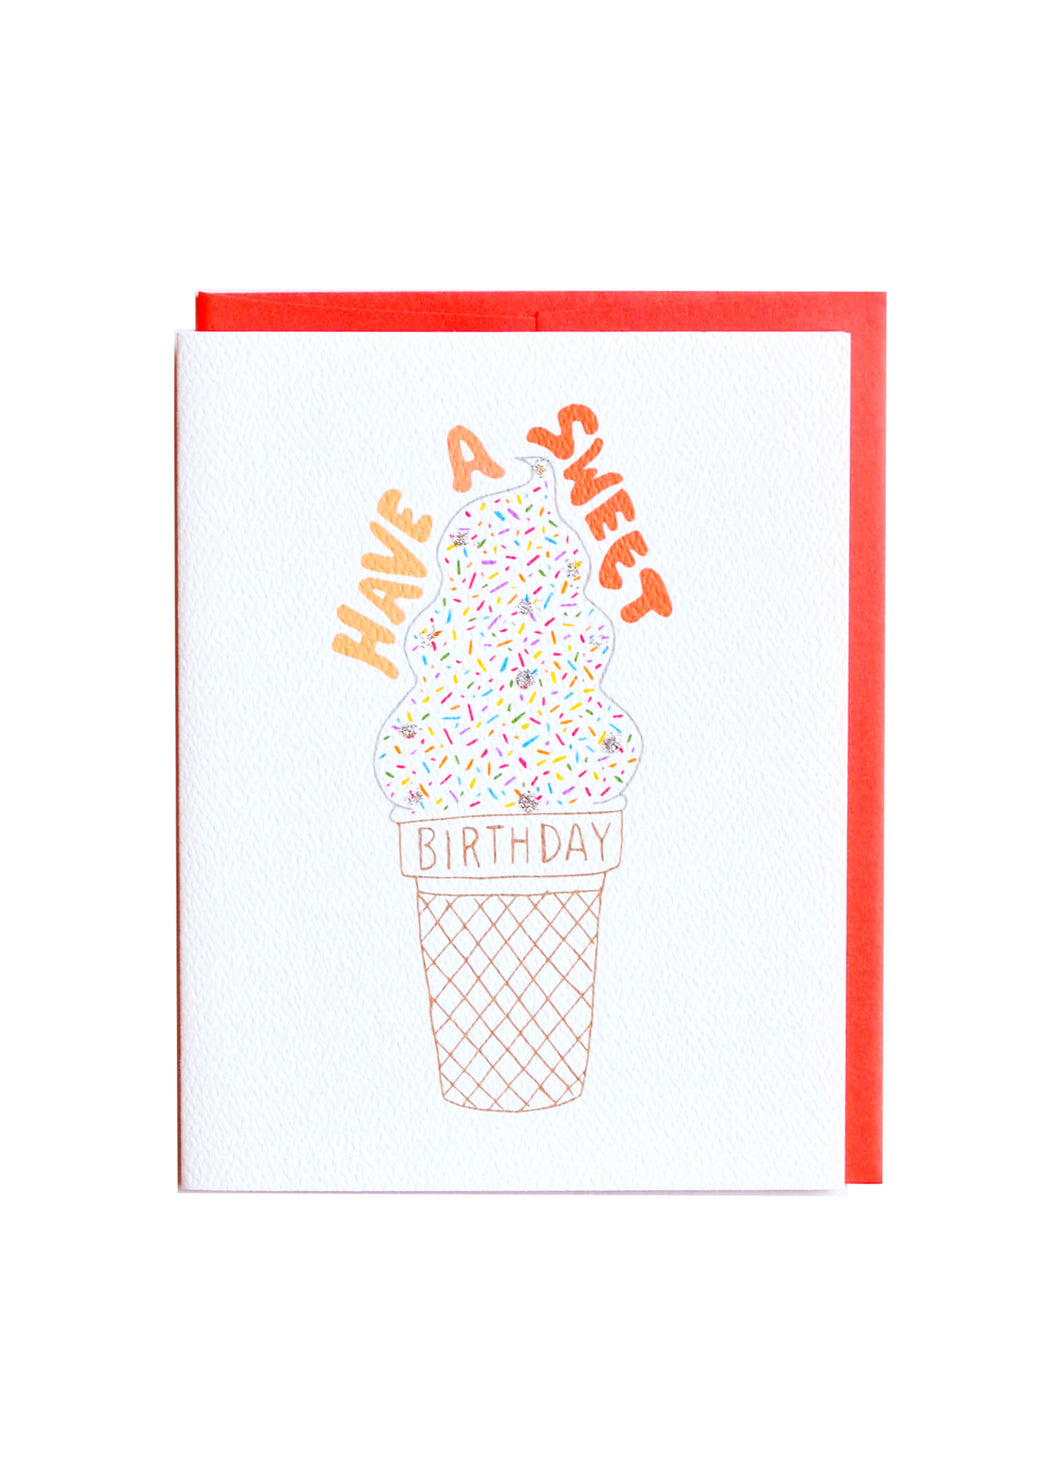 Cracked Designs - Have A Sweet Birthday